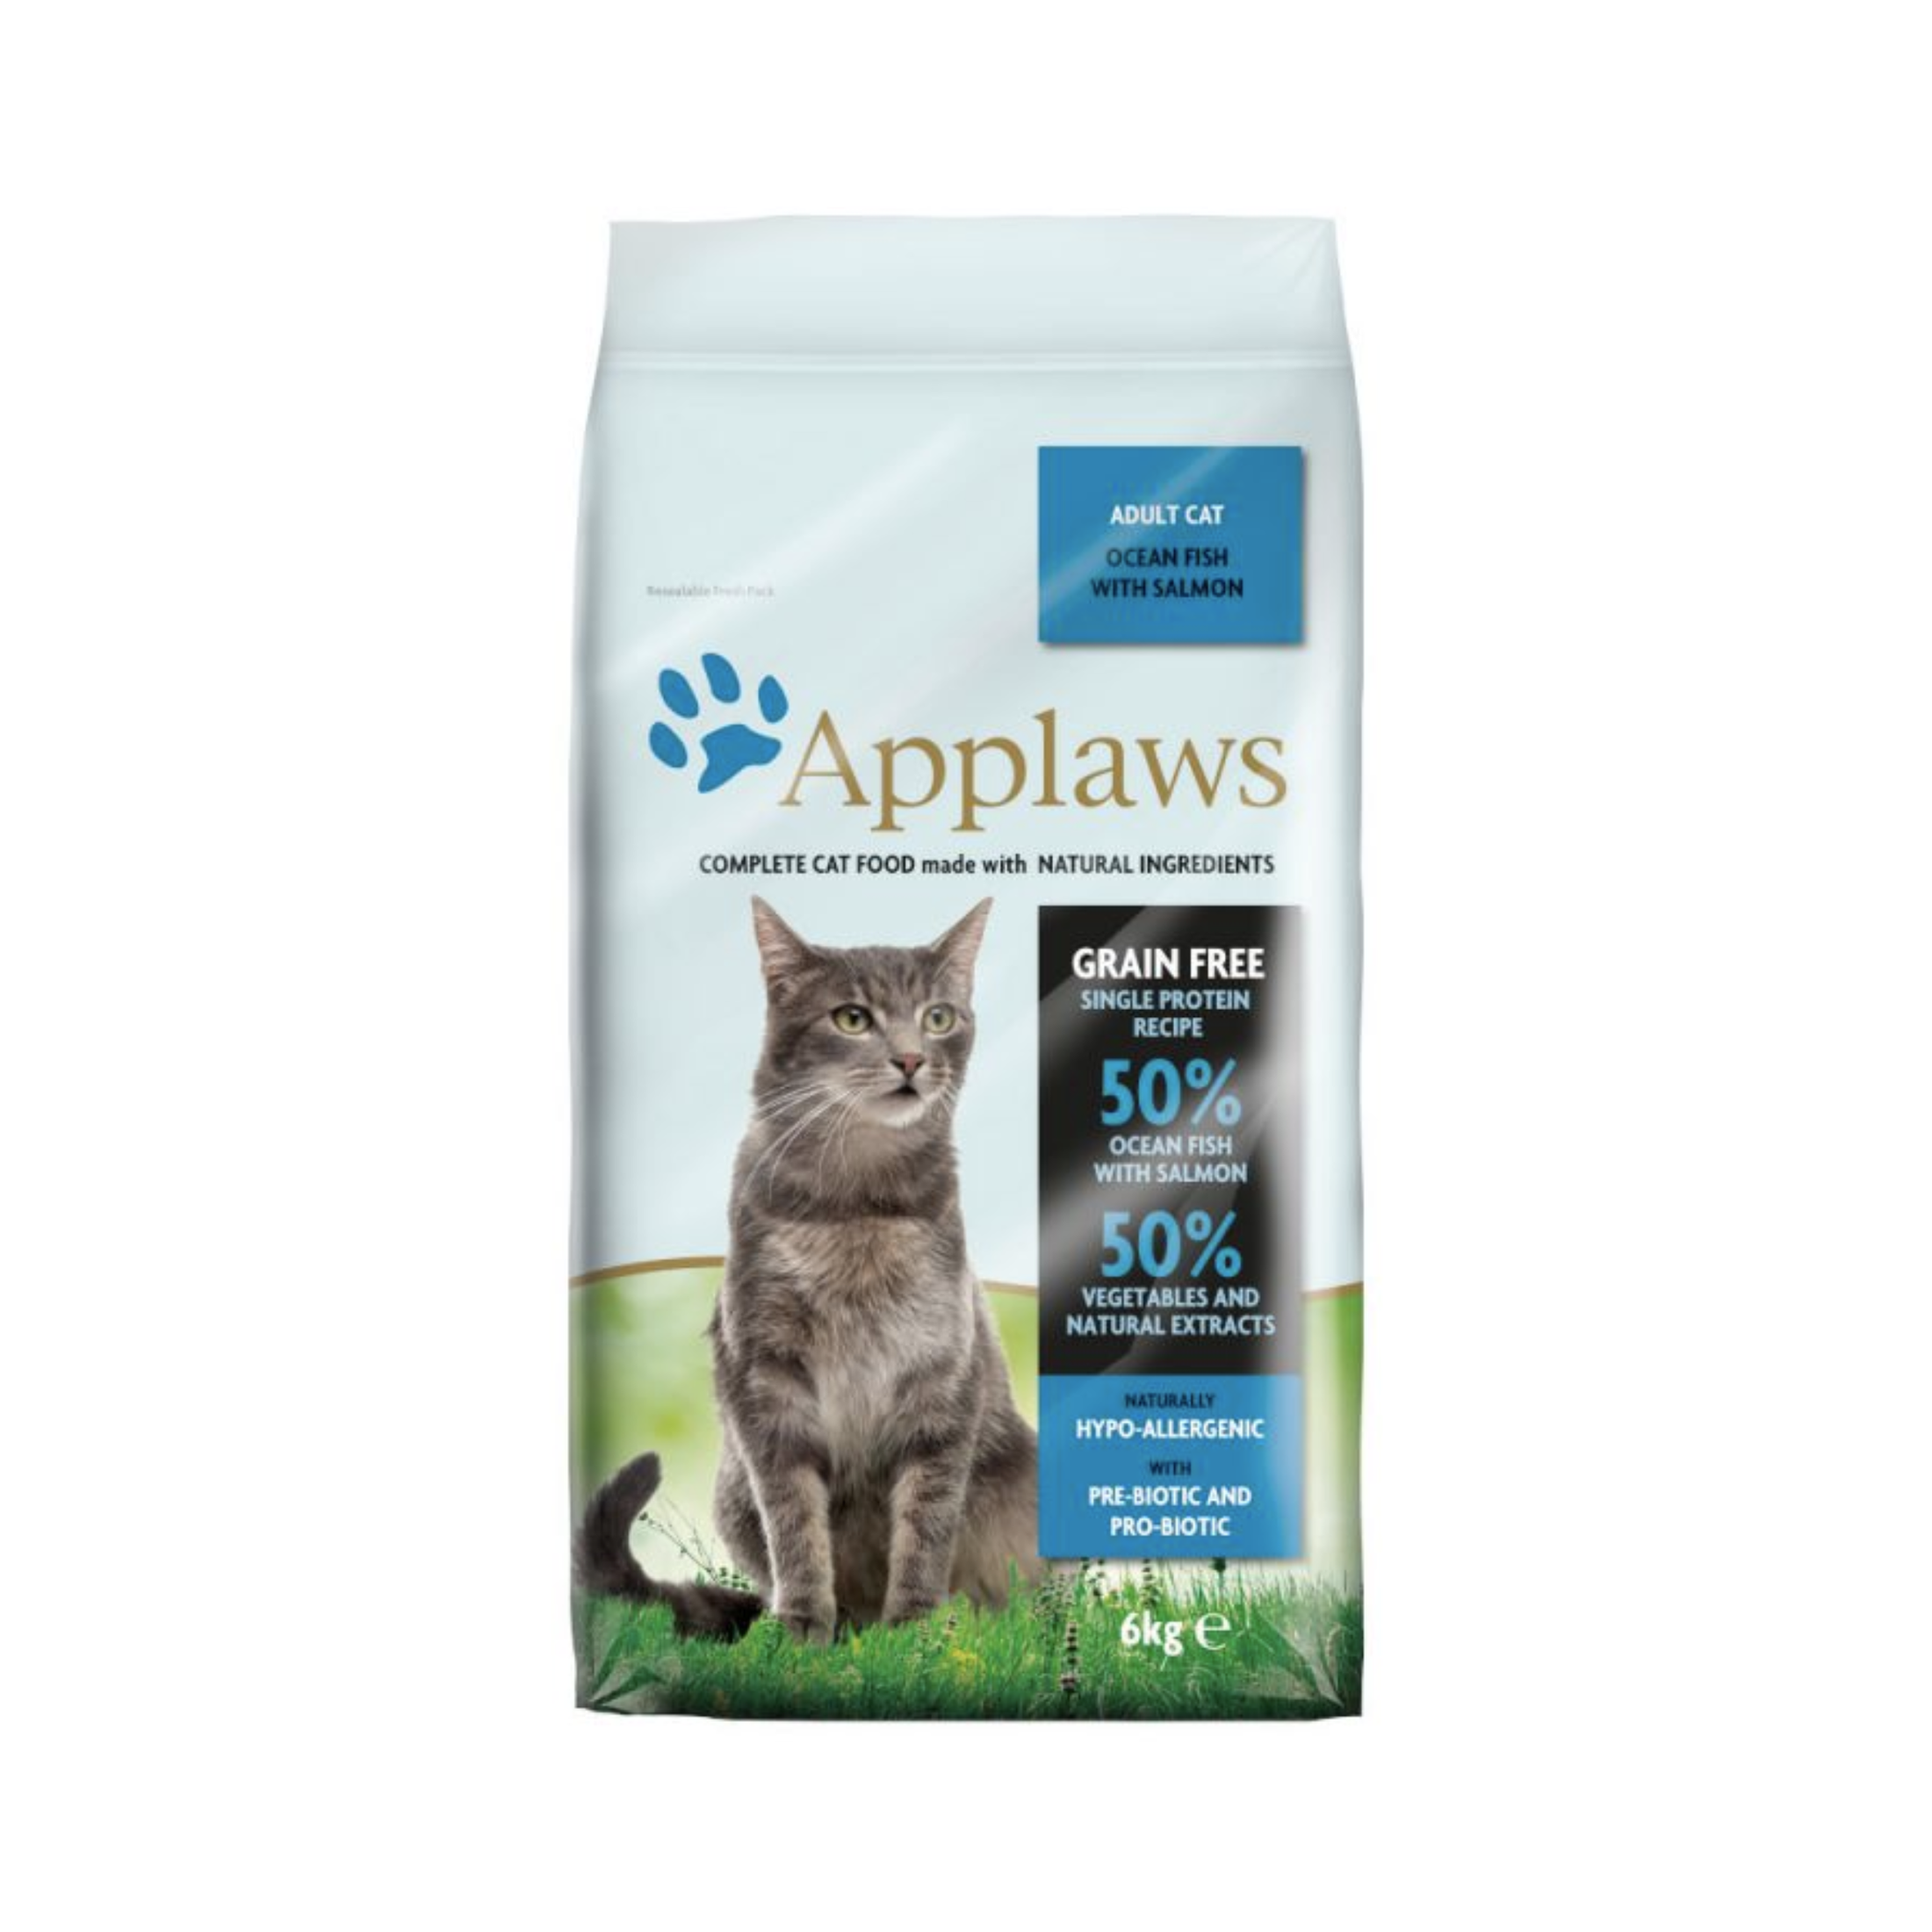 Applaws Adult Dry Cat Food - Ocean Fish with Salmon, Grain Free, Single Protein, Naturally Hypo-Allergenic, Pre-Biotic and Pro-Biotic, 6 kg